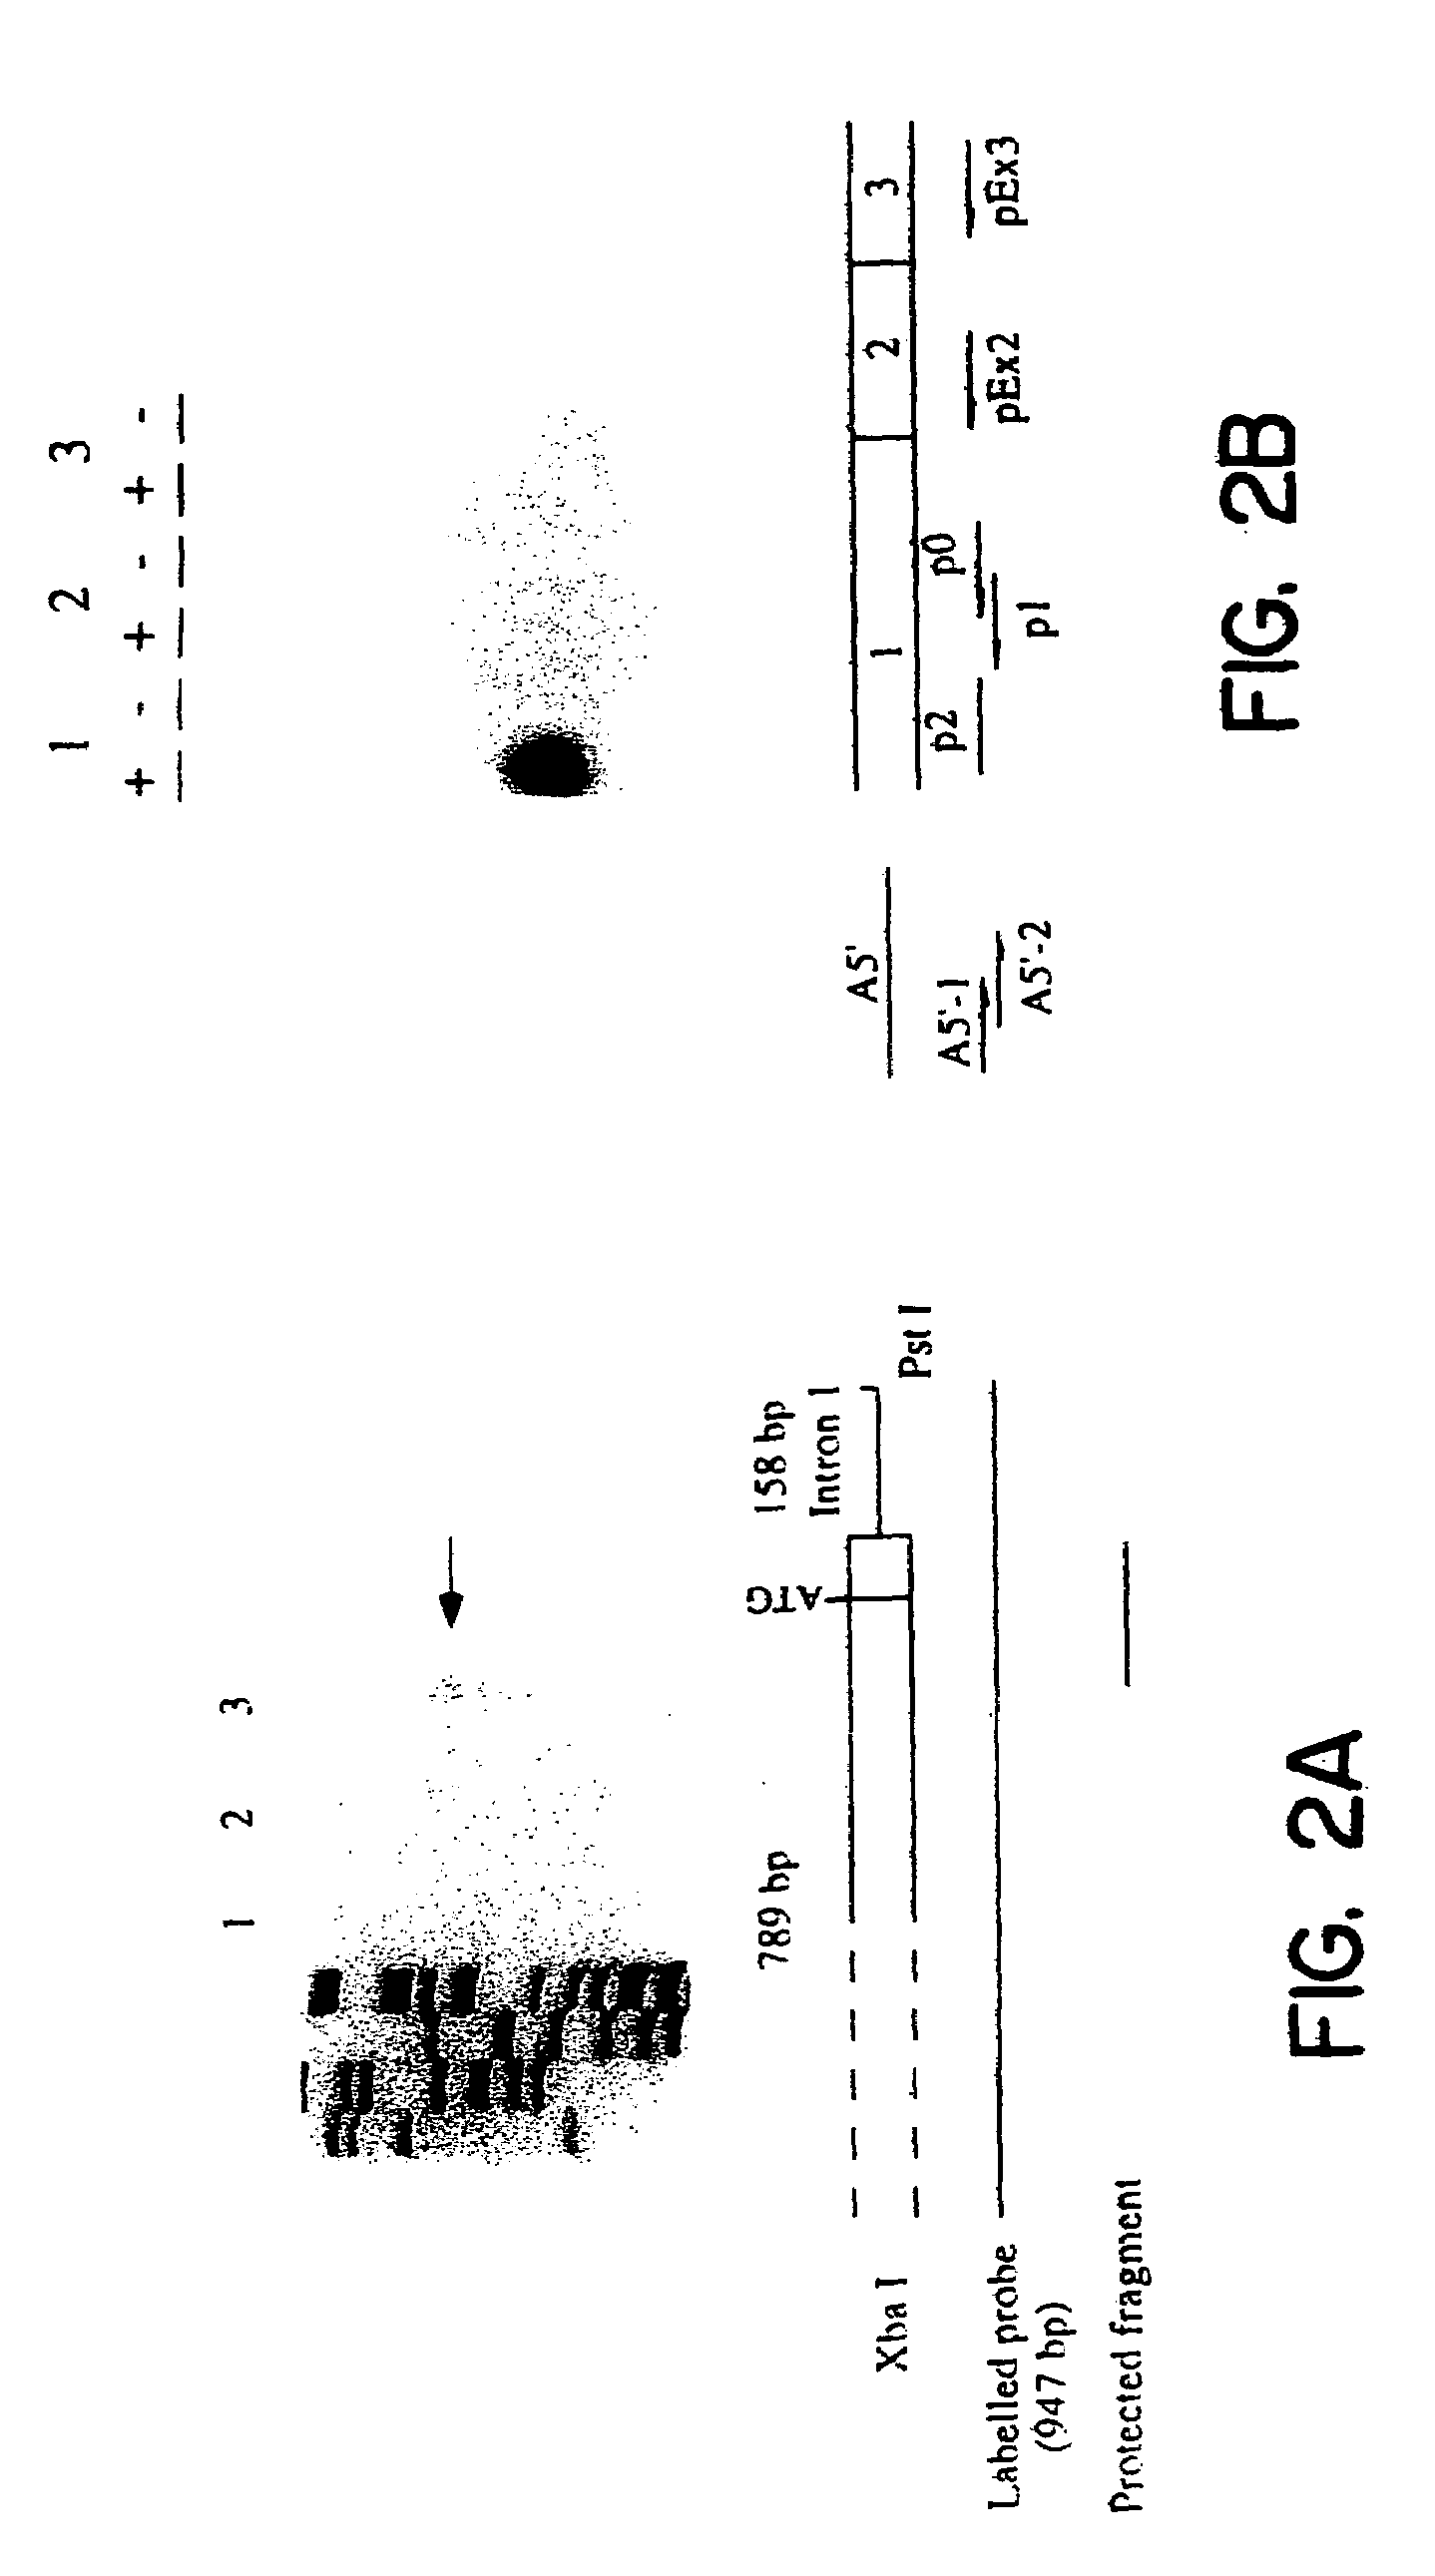 Method of screening for compounds that modulate activity of a regulatory sequence of the beta-2 subunit of a neuronal nicotinic acetylcholine receptor